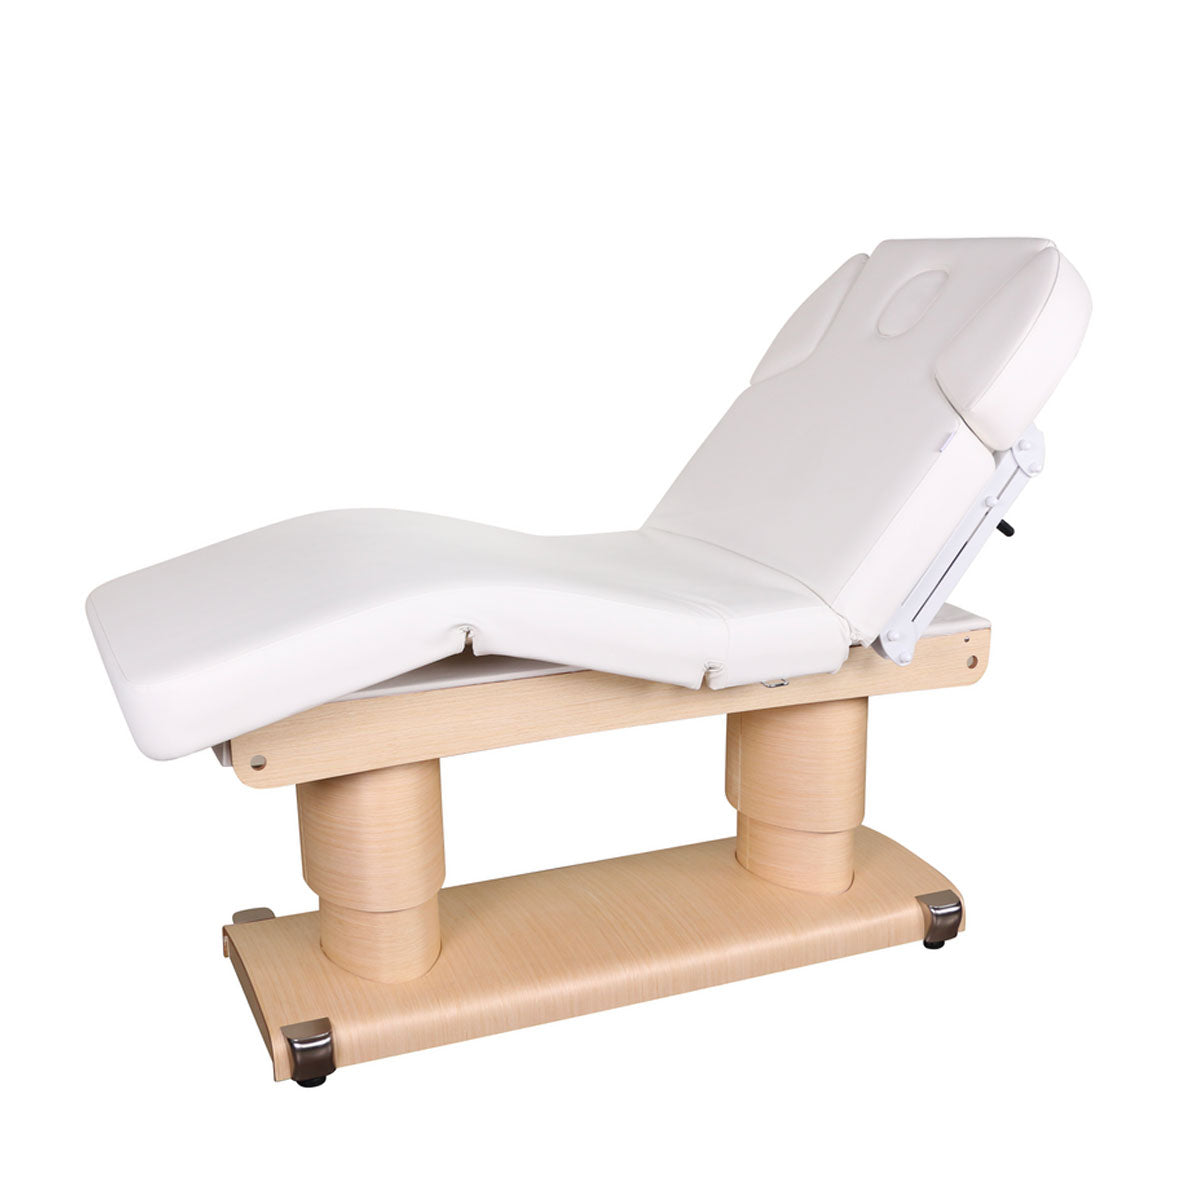 SPAMARC . Cooper . Massage bed . Wooden . 3 electric motor (STB)